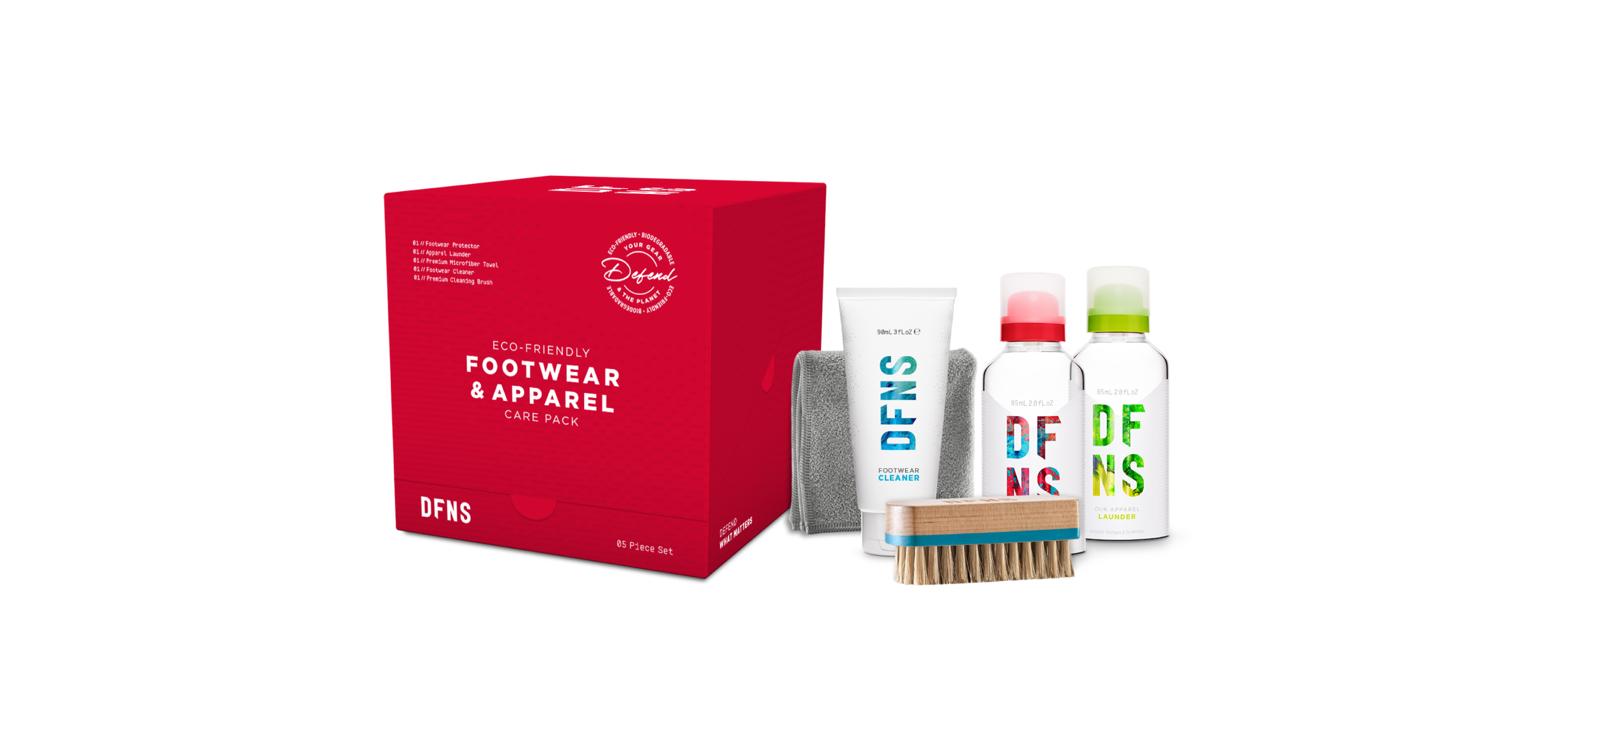 DFNS cleaning kit